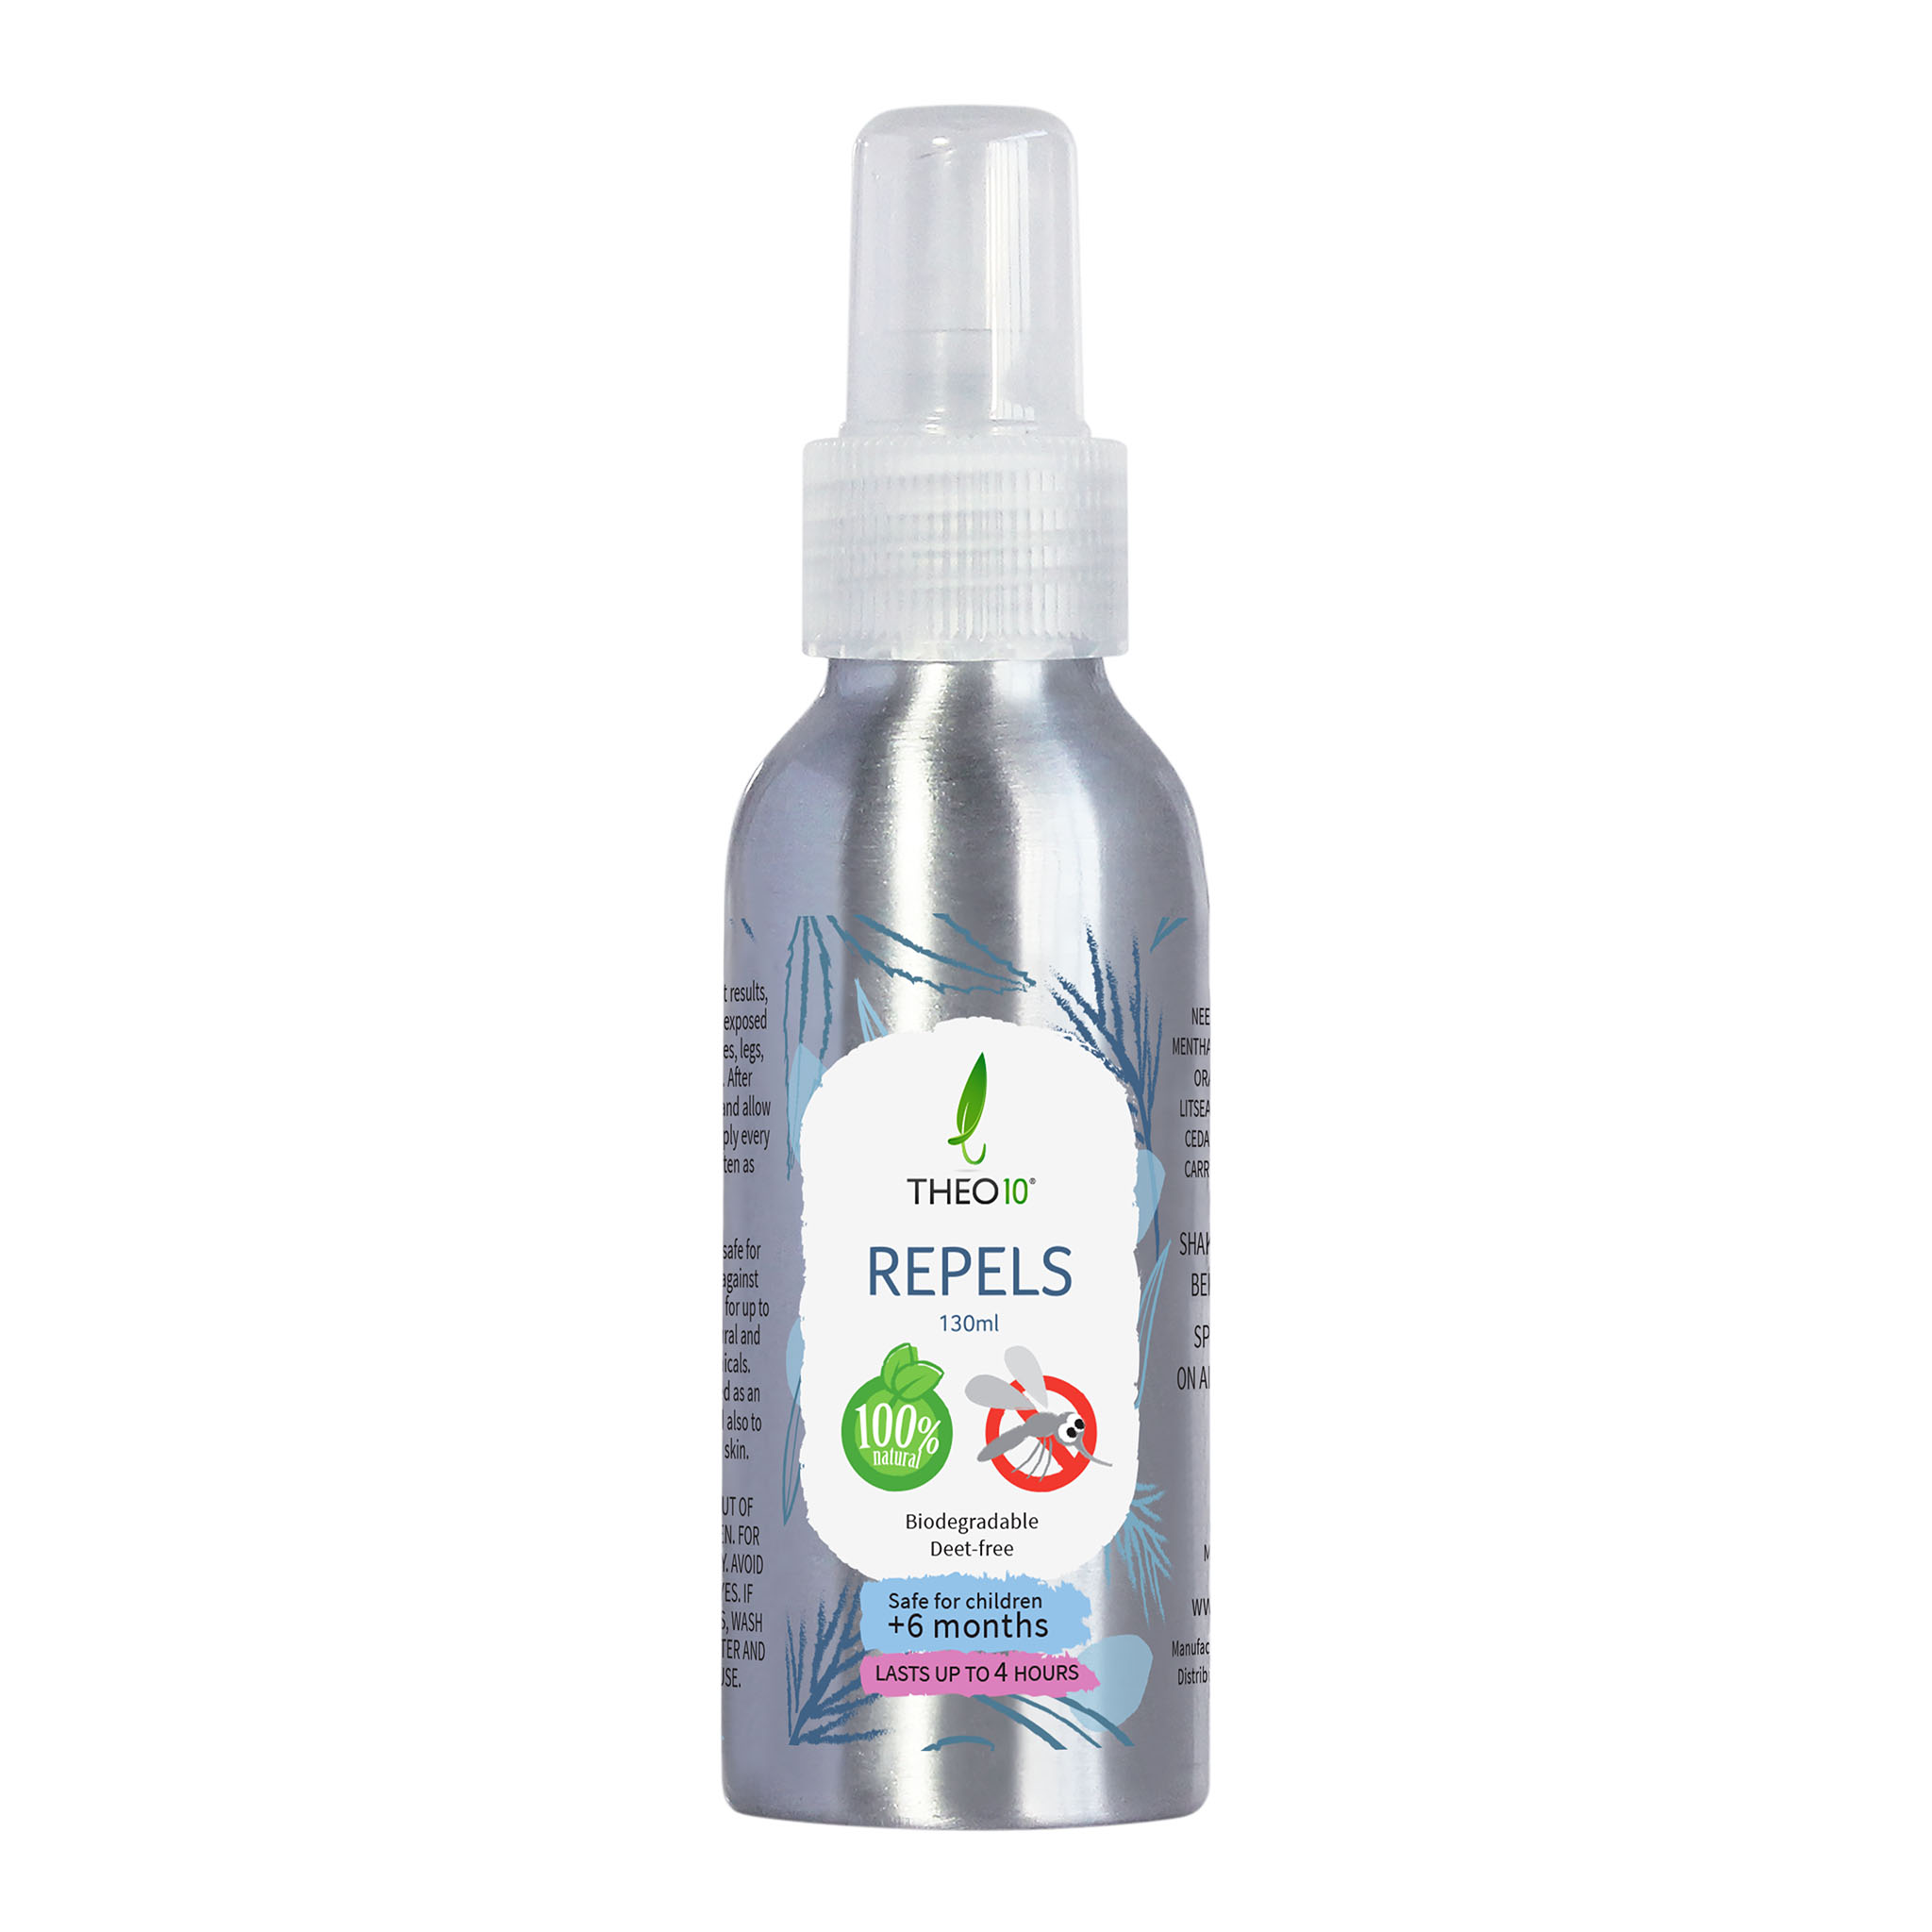 Theo10® Repels (130mL)